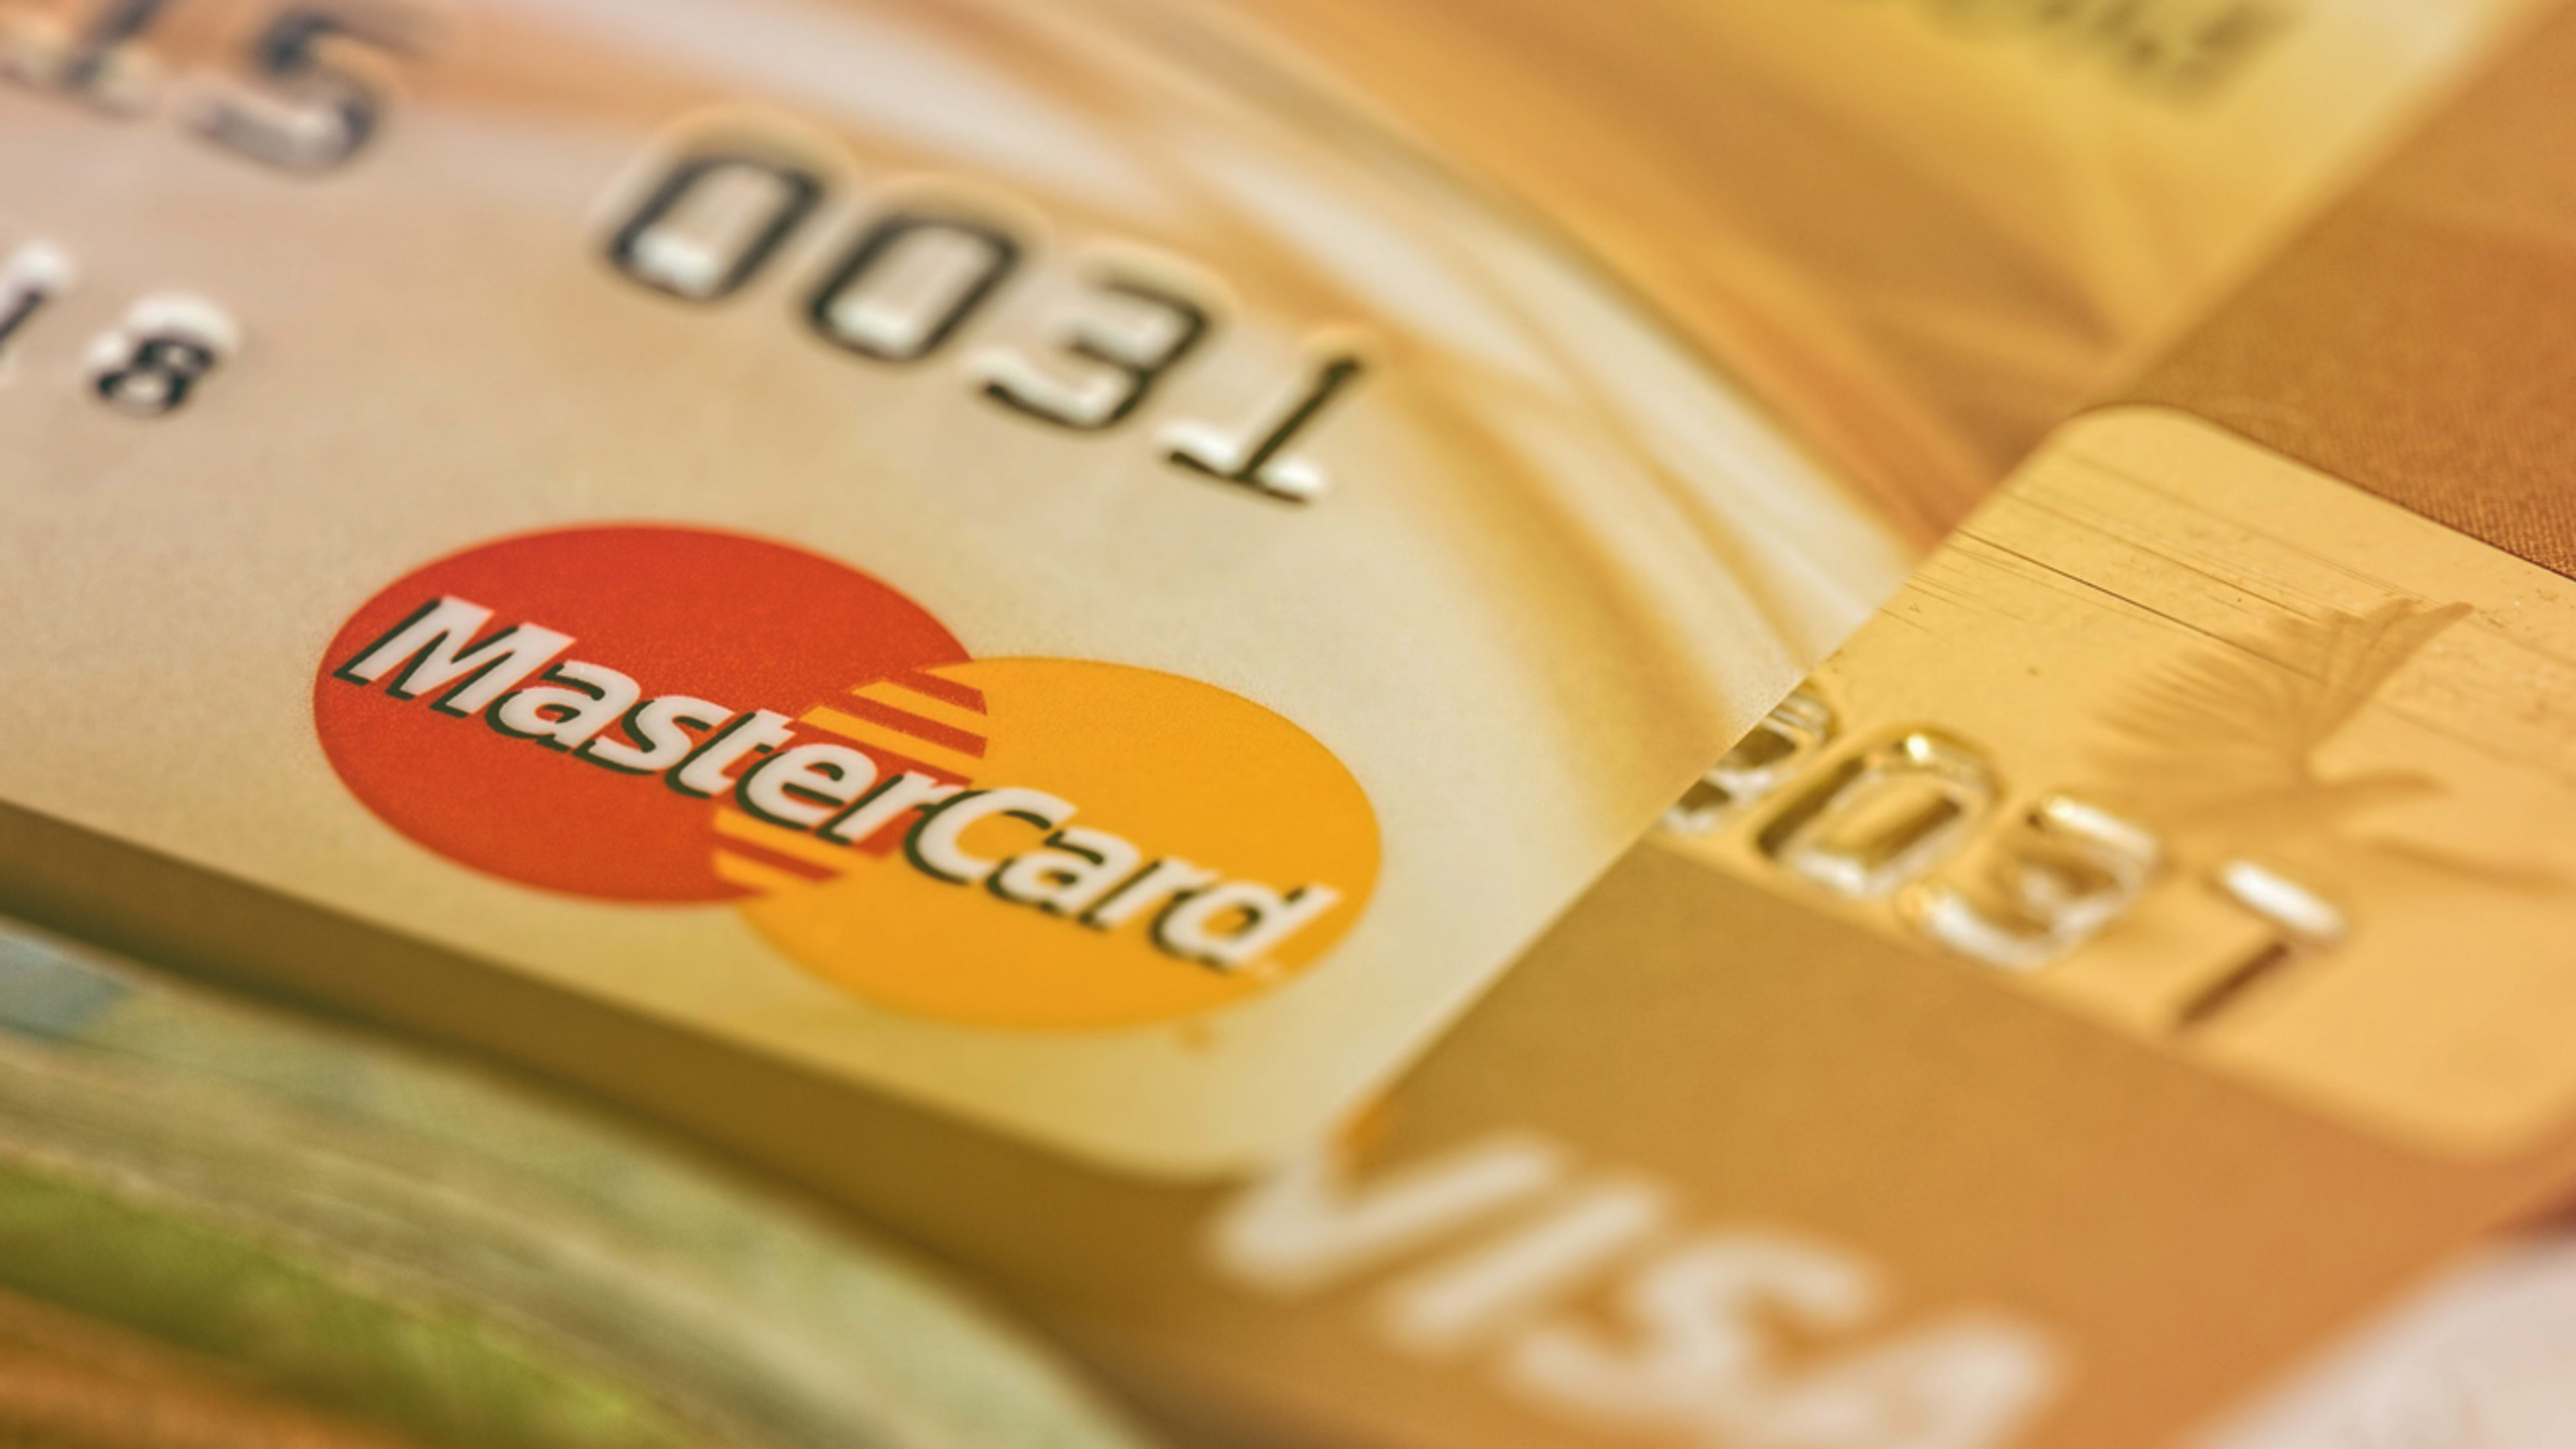 Google has been secretly tracking your offline purchases with help from Mastercard